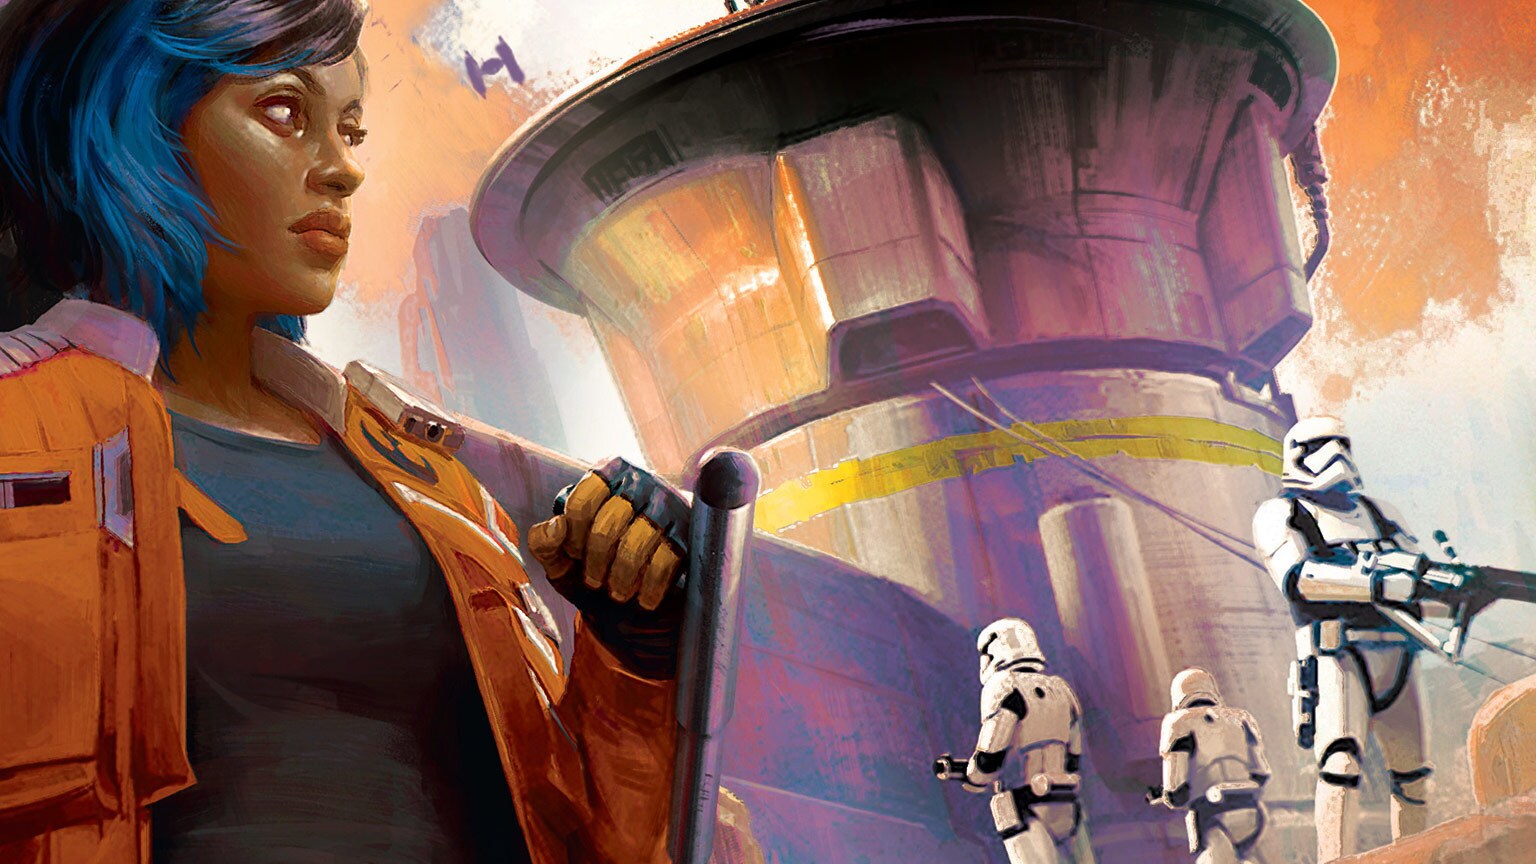 Leia Has a Mission for Vi Moradi in Star Wars: Galaxy's Edge - Black Spire - Exclusive Excerpt